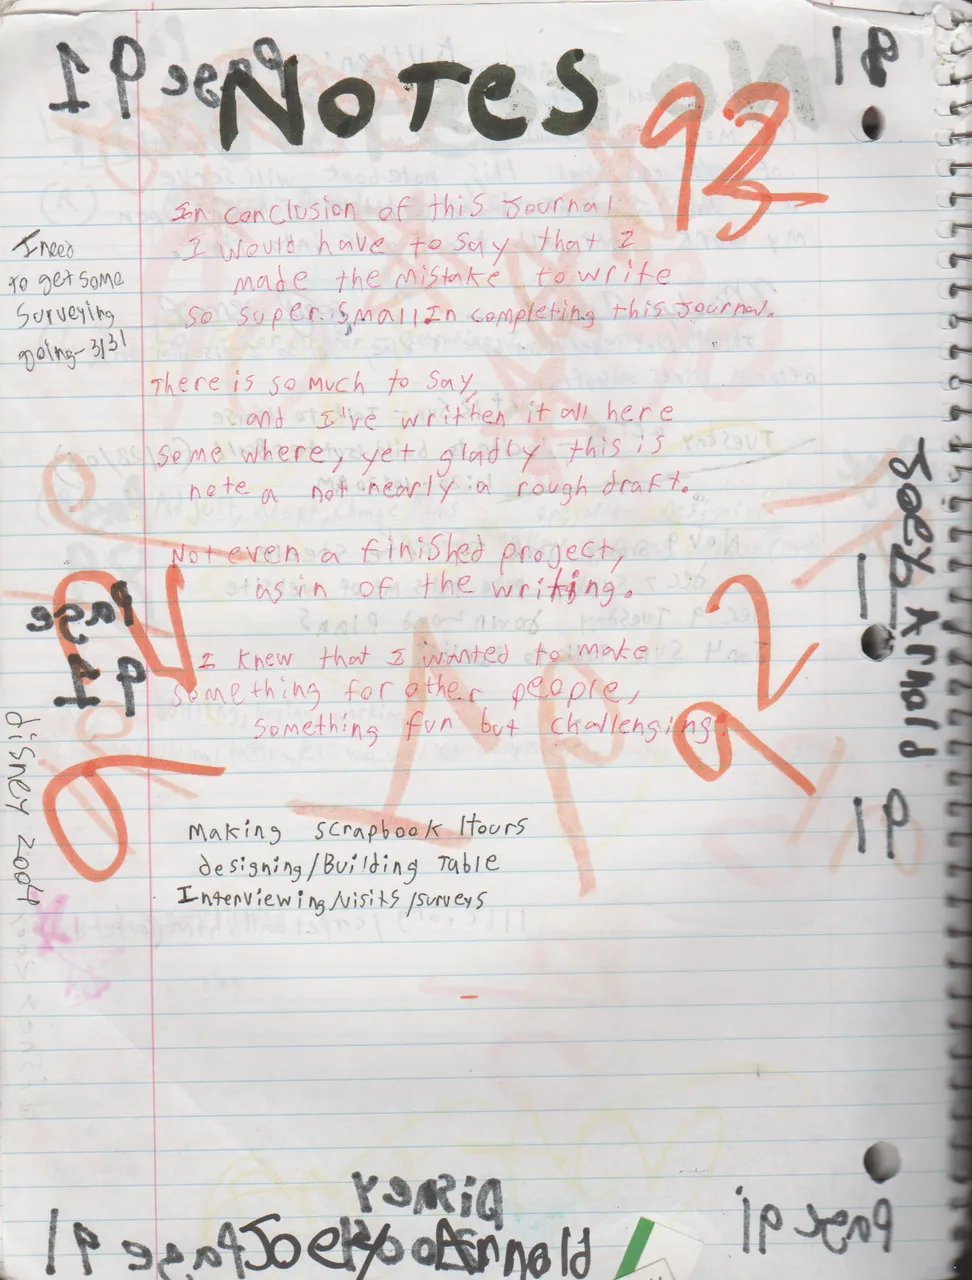 2004-01-29 - Thursday - Carpetball FGHS Senior Project Journal, Joey Arnold, Part 02, 96pages numbered, Notebook-90.png